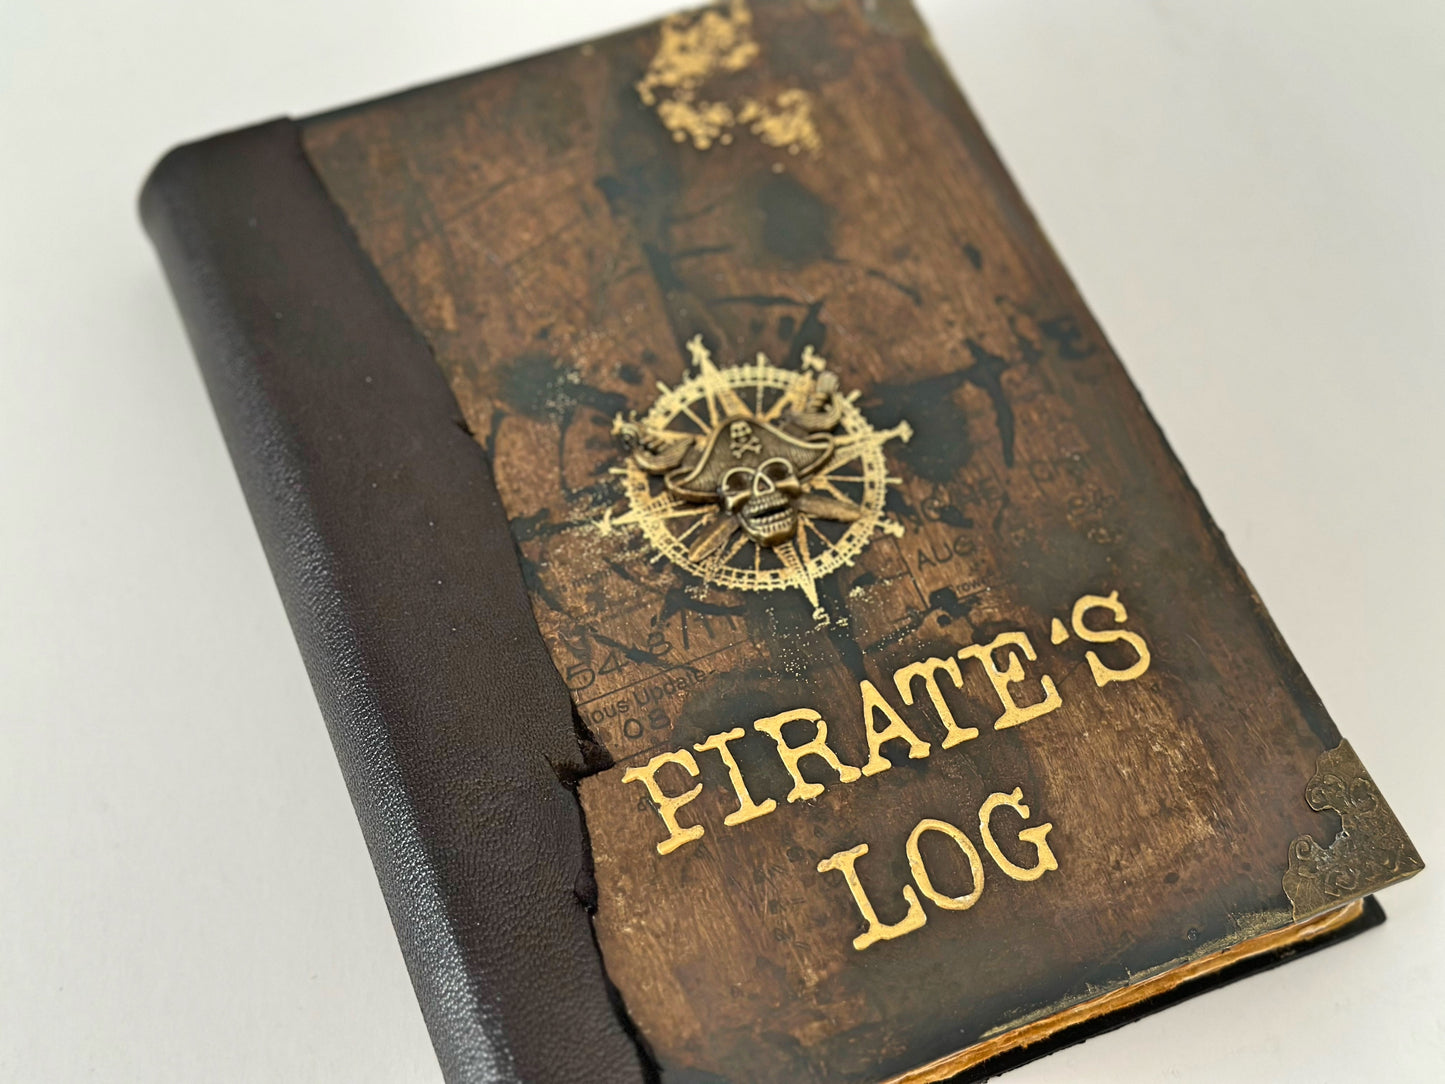 Pirate's log Journal Book, Nautical Travel Journal Sketchbook, Cosplay Spellbook , Sea Lover Diary Notebook Gift for Captain Scrapbook